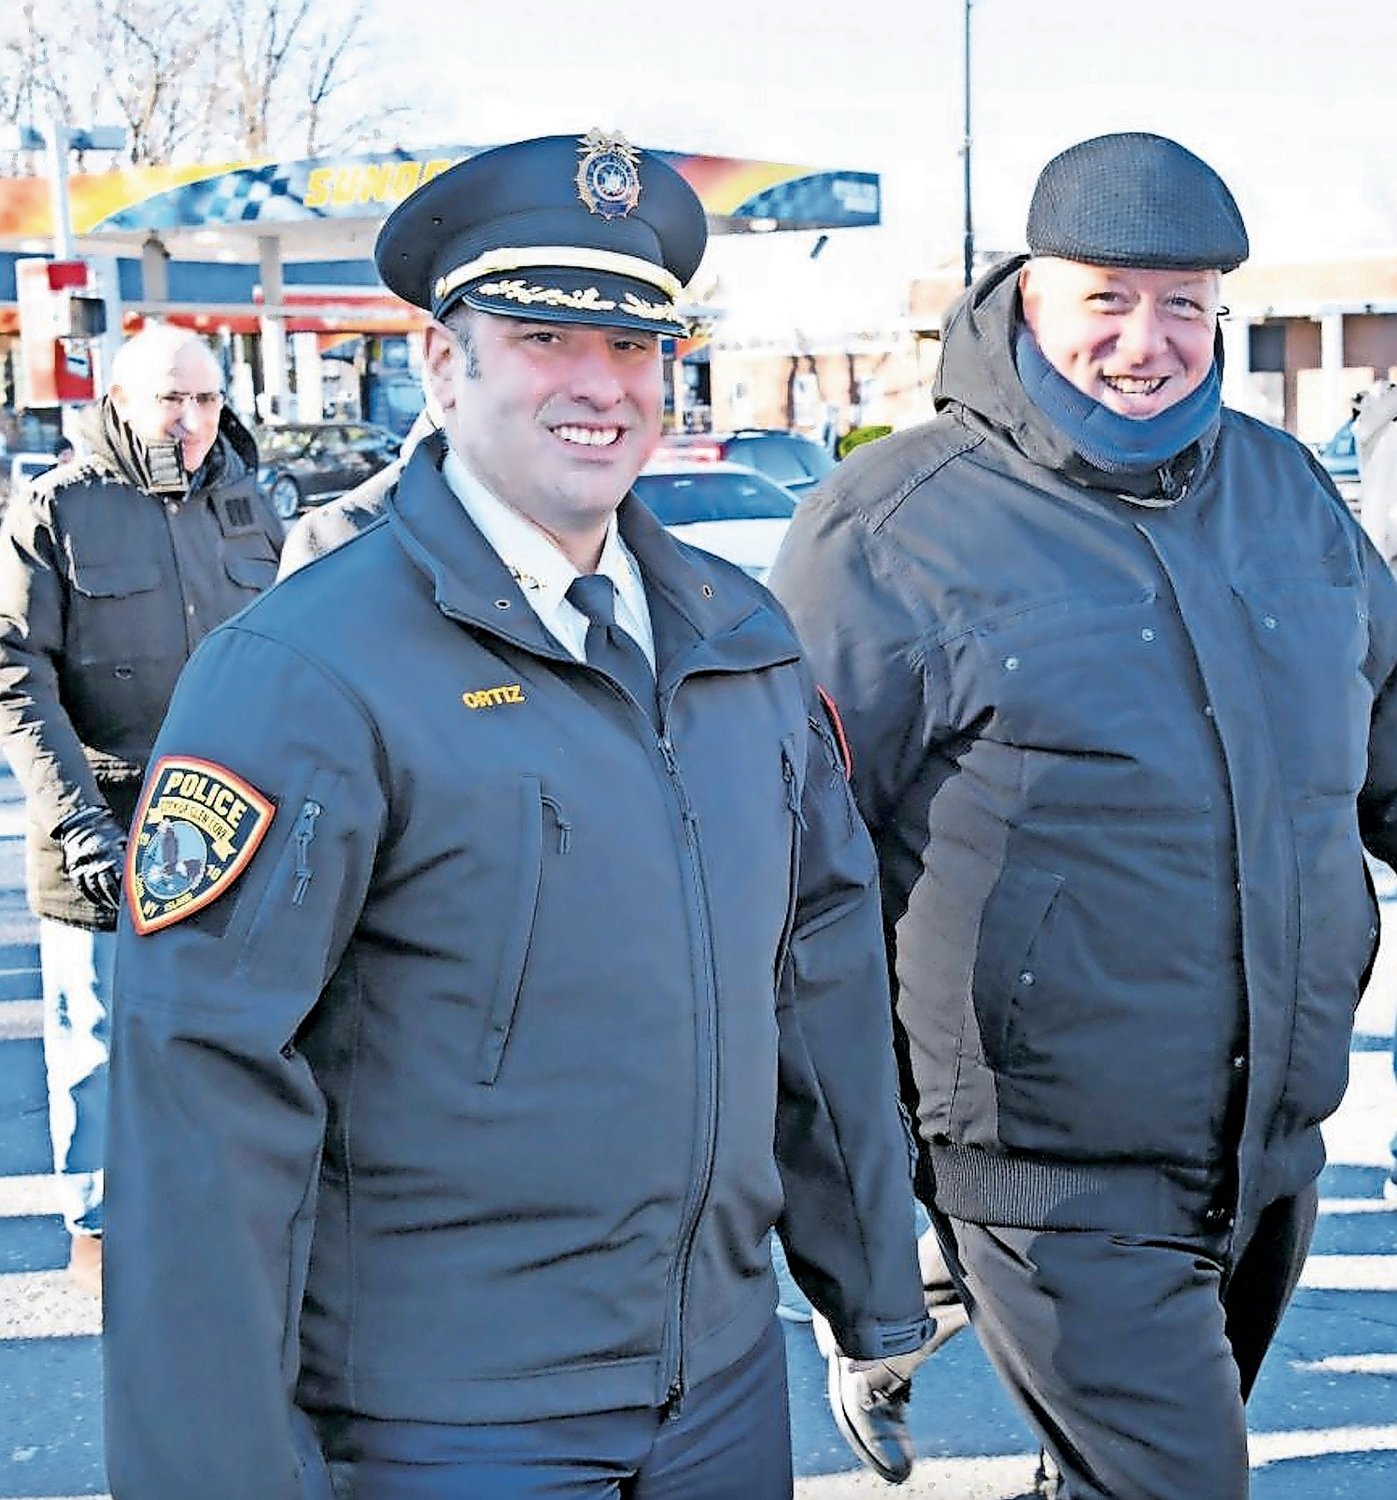 Glen Cove Deputy Chief Chris Ortiz, left, and CTI Cantor Gustavo Guitlin showed their support for the Rev. Dr. Martin Luther King Jr. during the January 2020 parade in Glen Cove that honored the late civil rights leader.